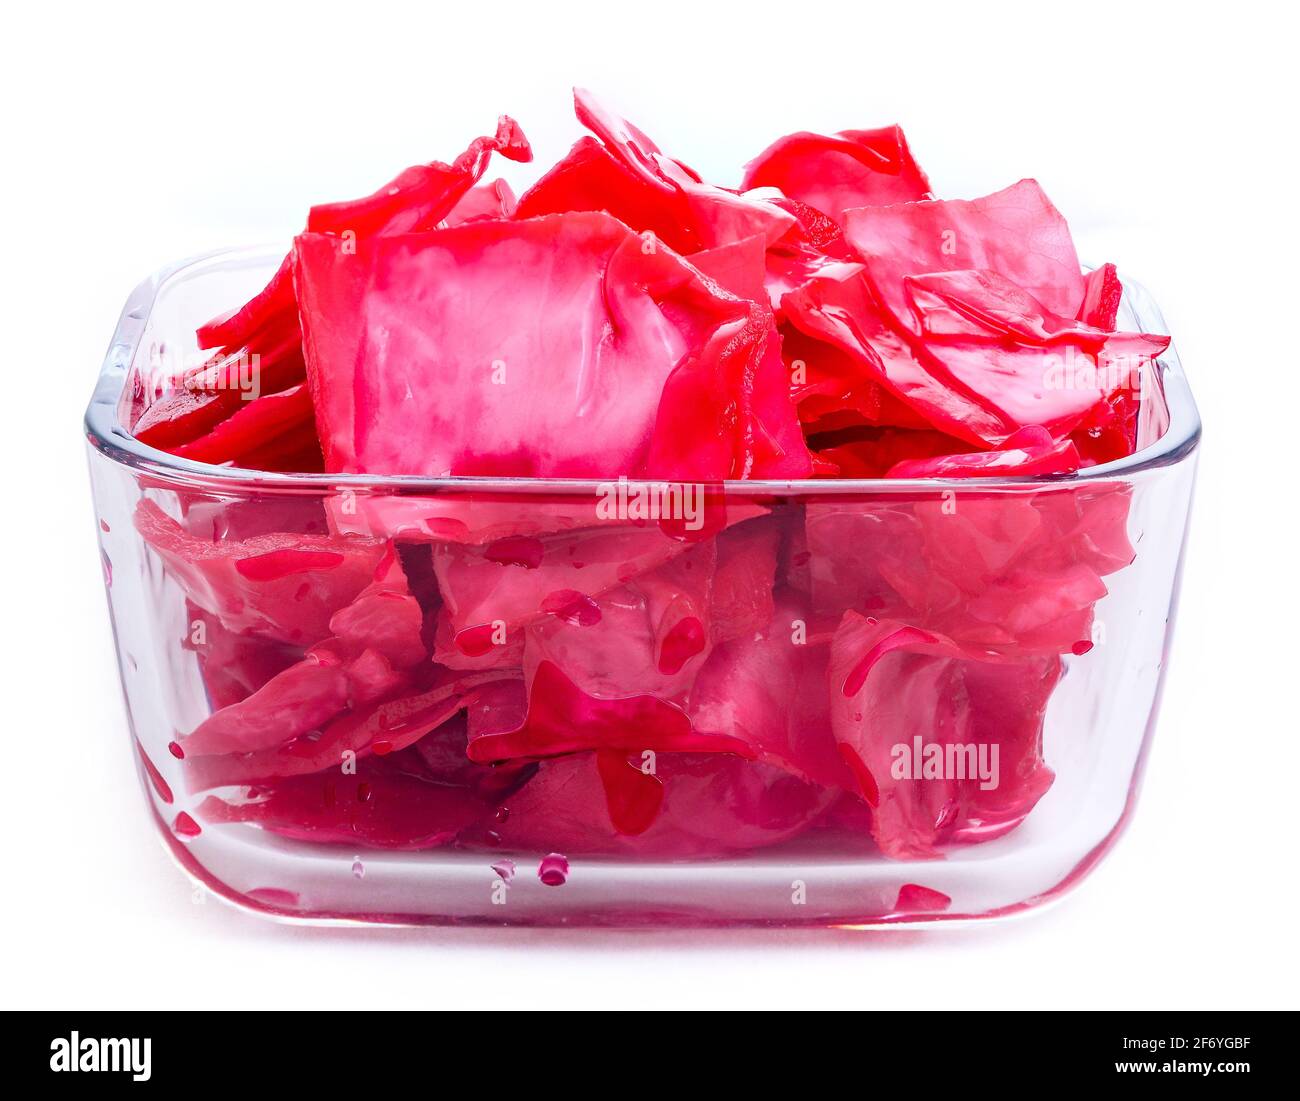 Red sauerkraut with beets in a bowl Stock Photo